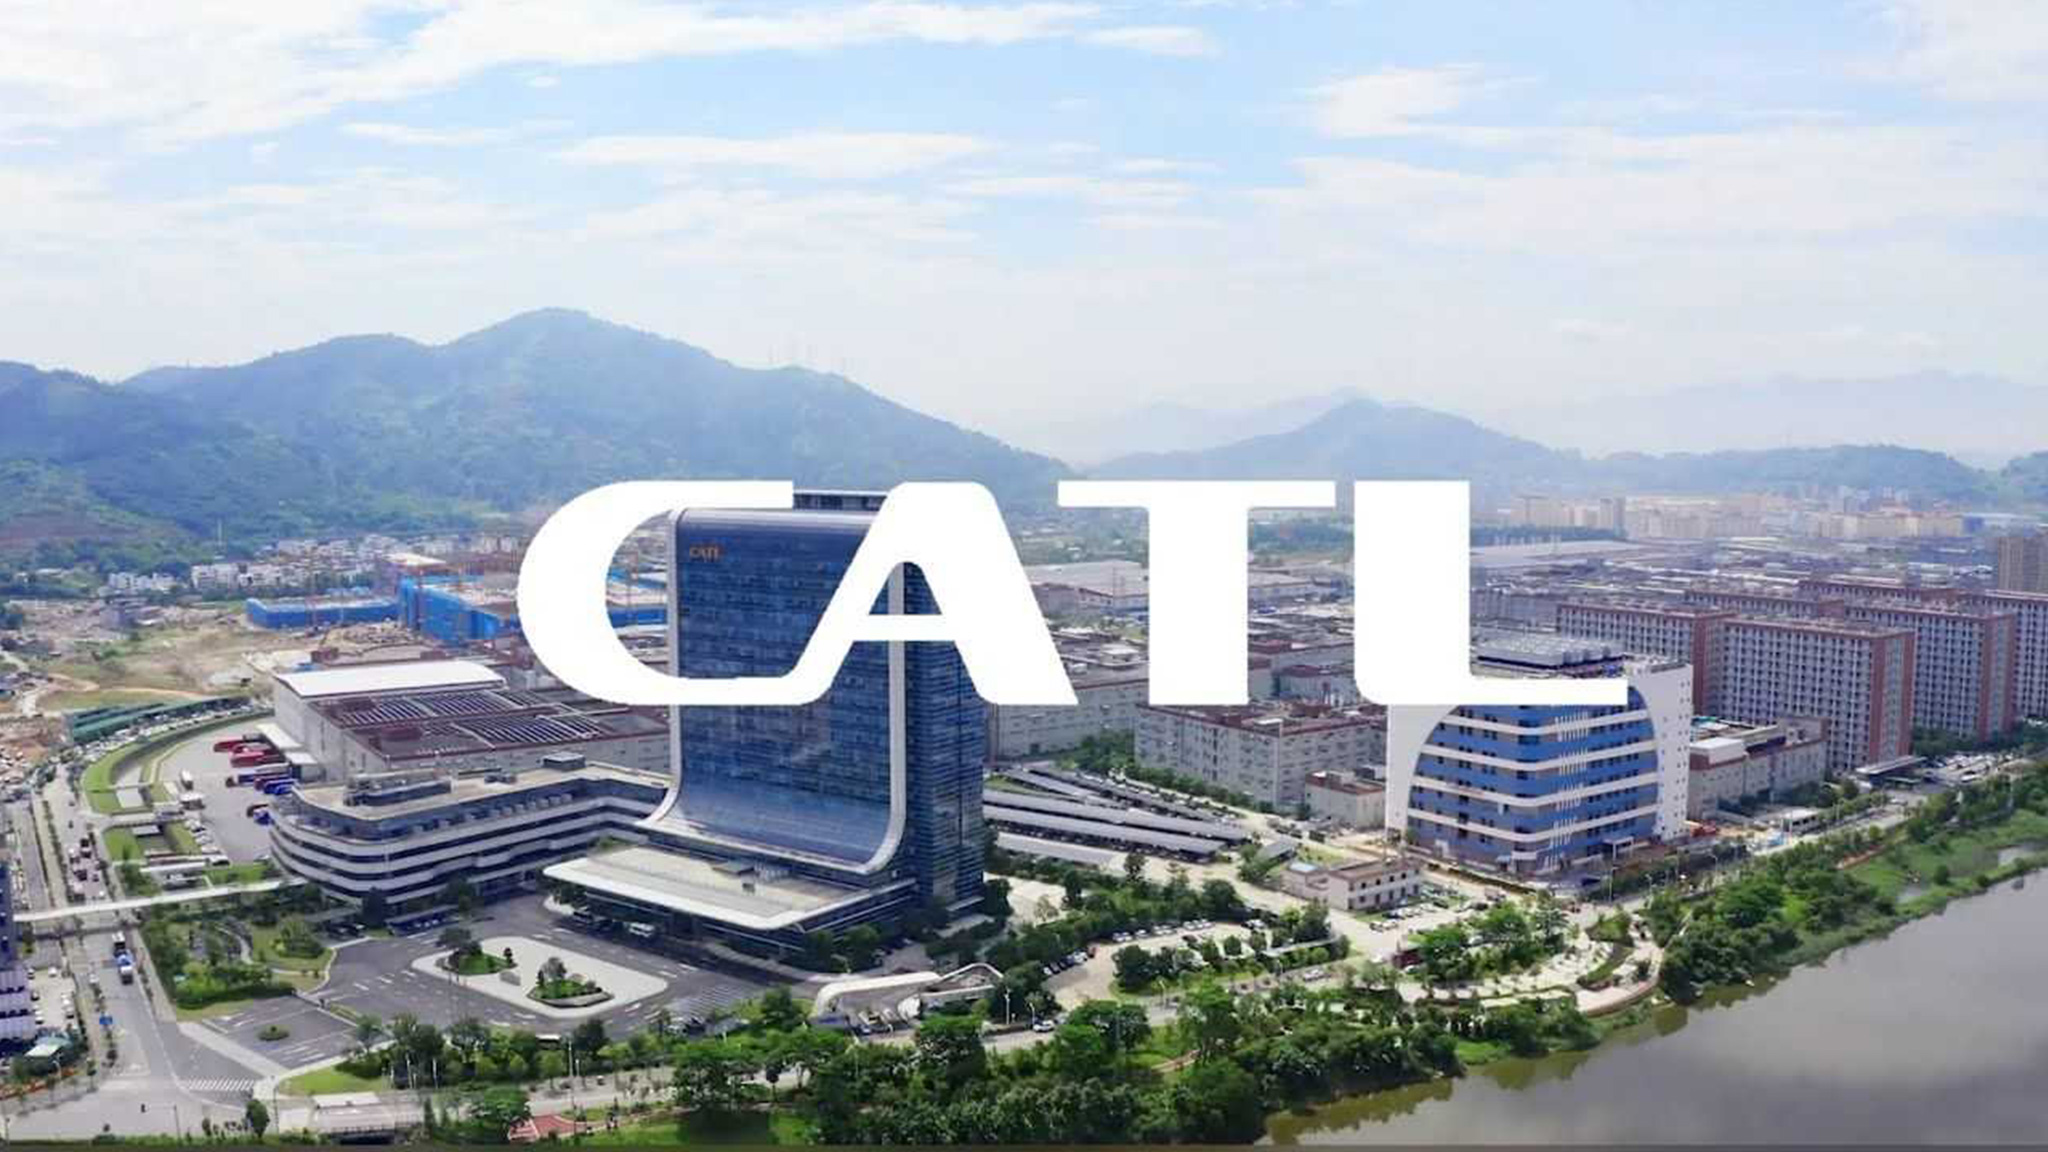 China’s CATL Extends Lead as World’s Top EV Battery Maker